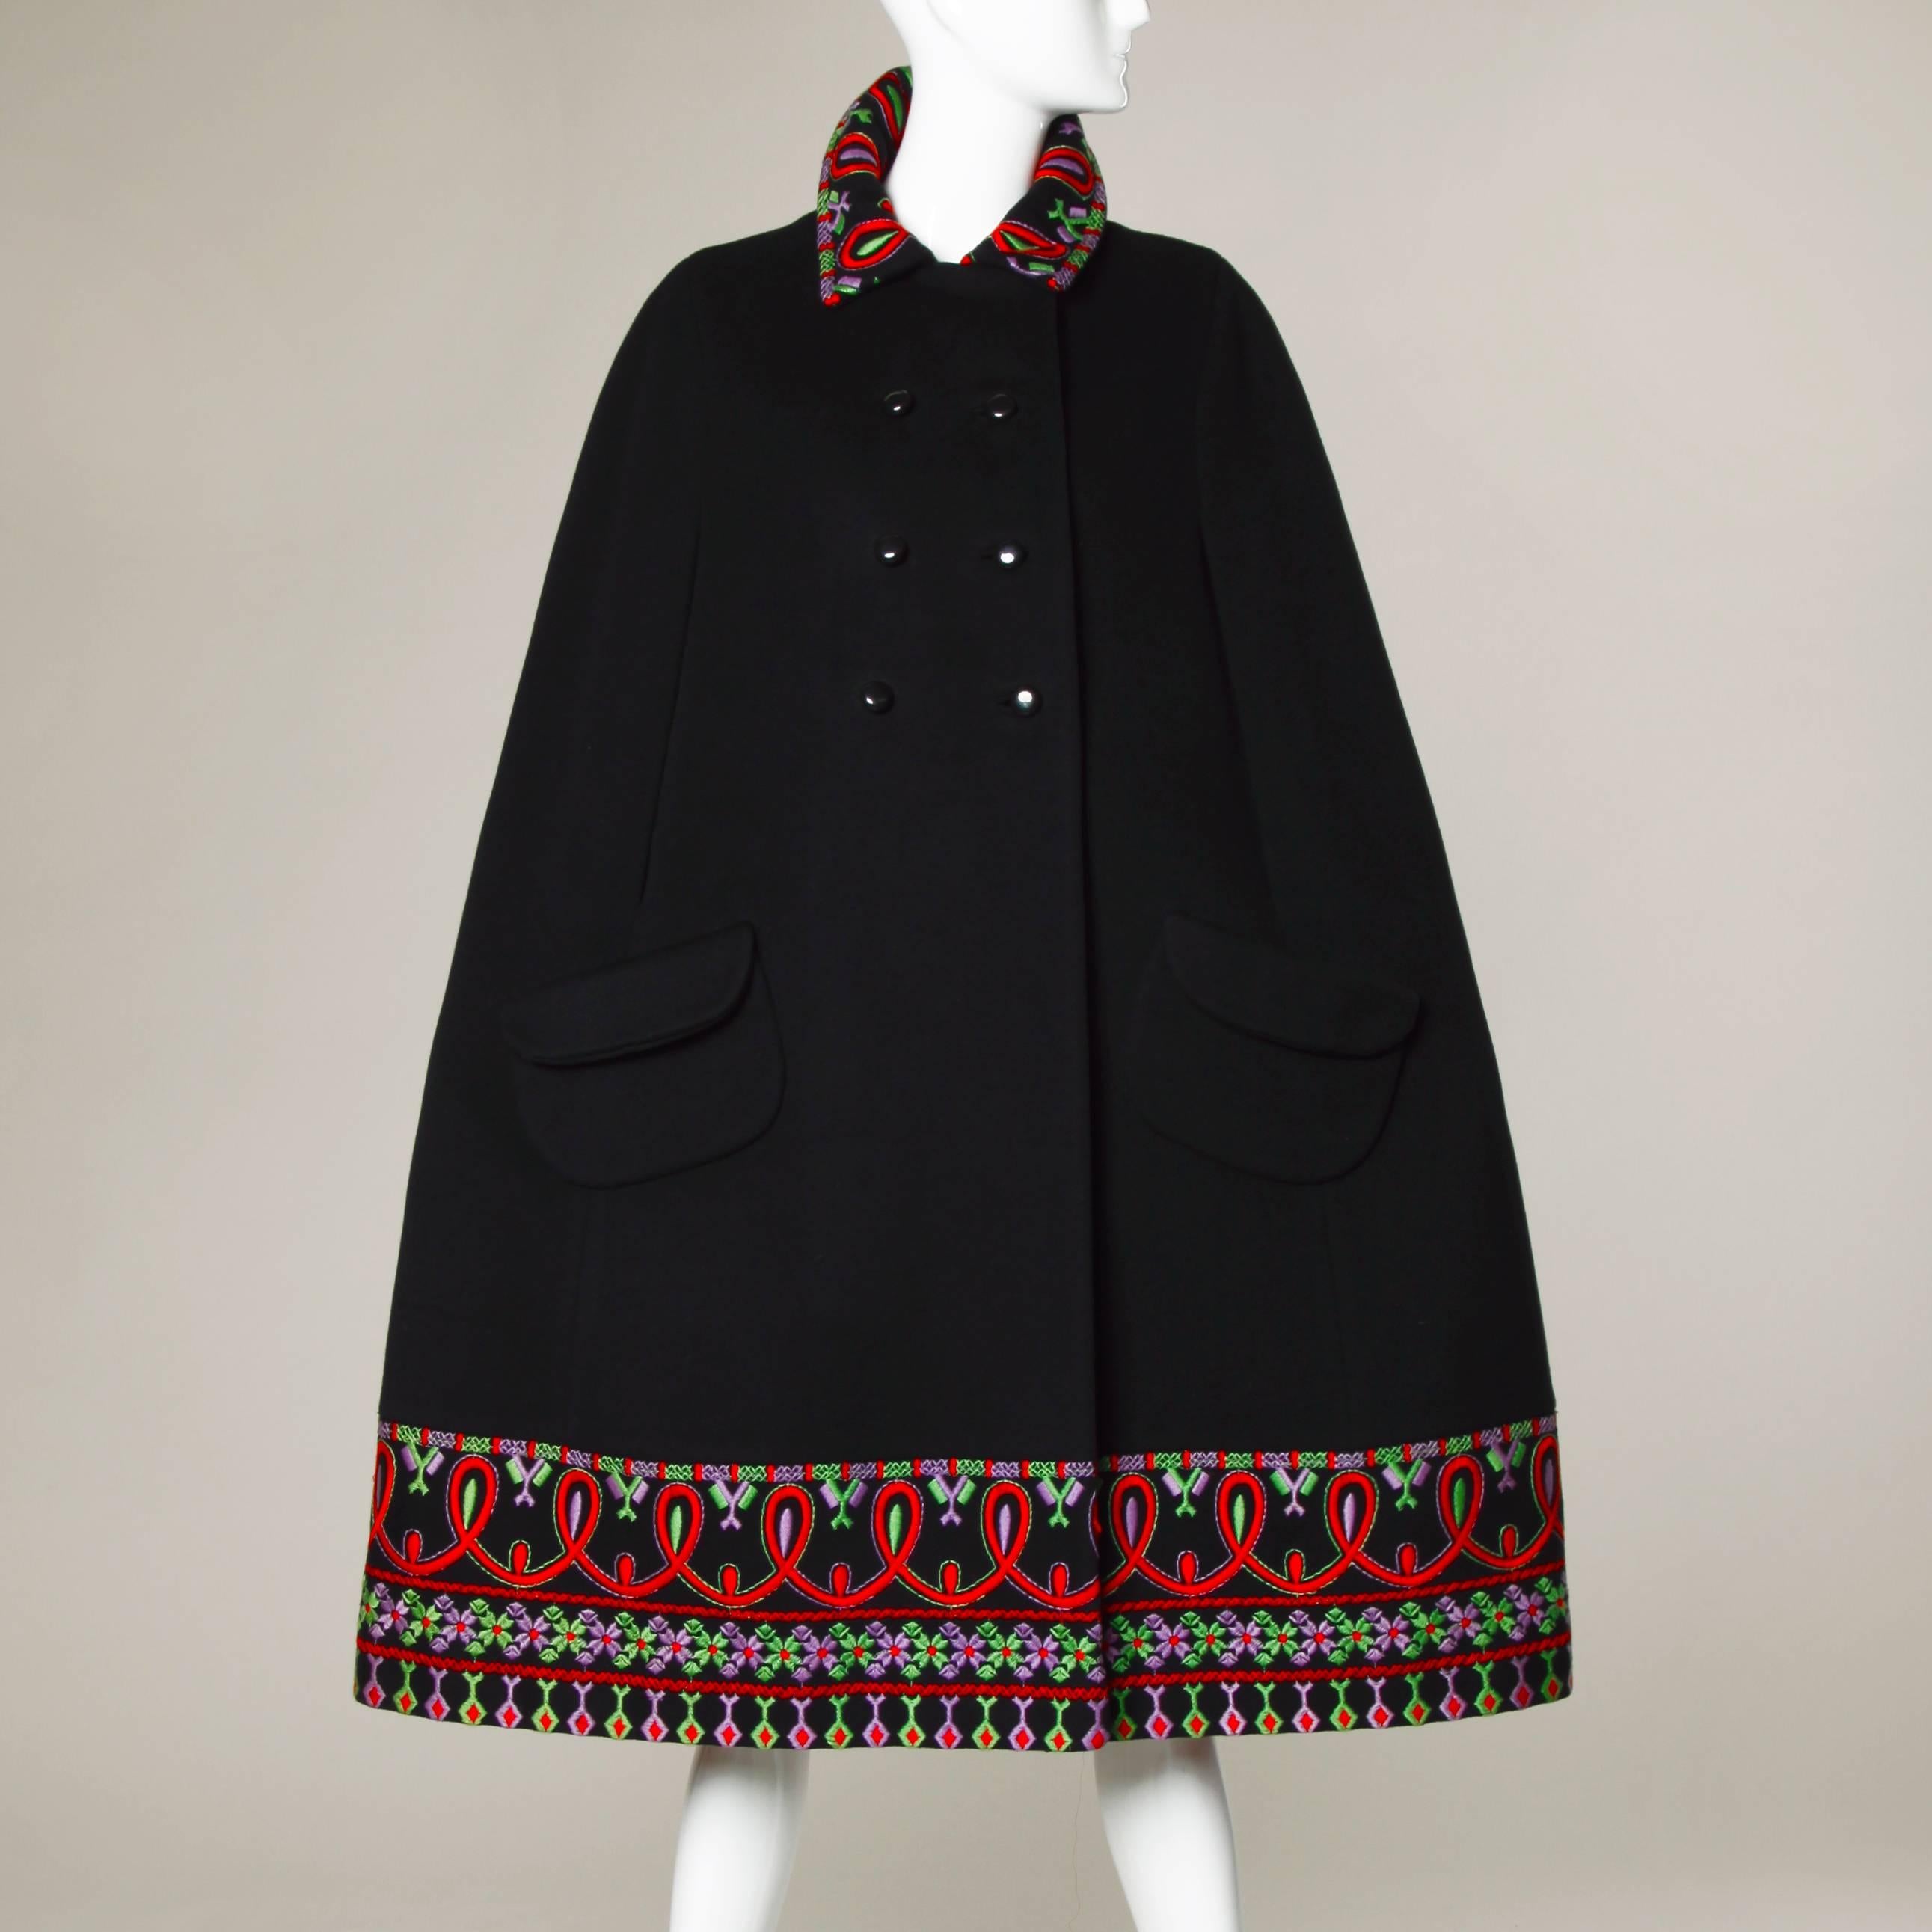 Heavy black wool cape coat with Swiss-style hand embroidery, arm slits and double breasted buttons. Gorgeous red satin lining. By Julian Gold.

Details:

Fully Lined
Front Pockets
Arm Slits (for Cape)
Front Button and Snap Closure
Marked